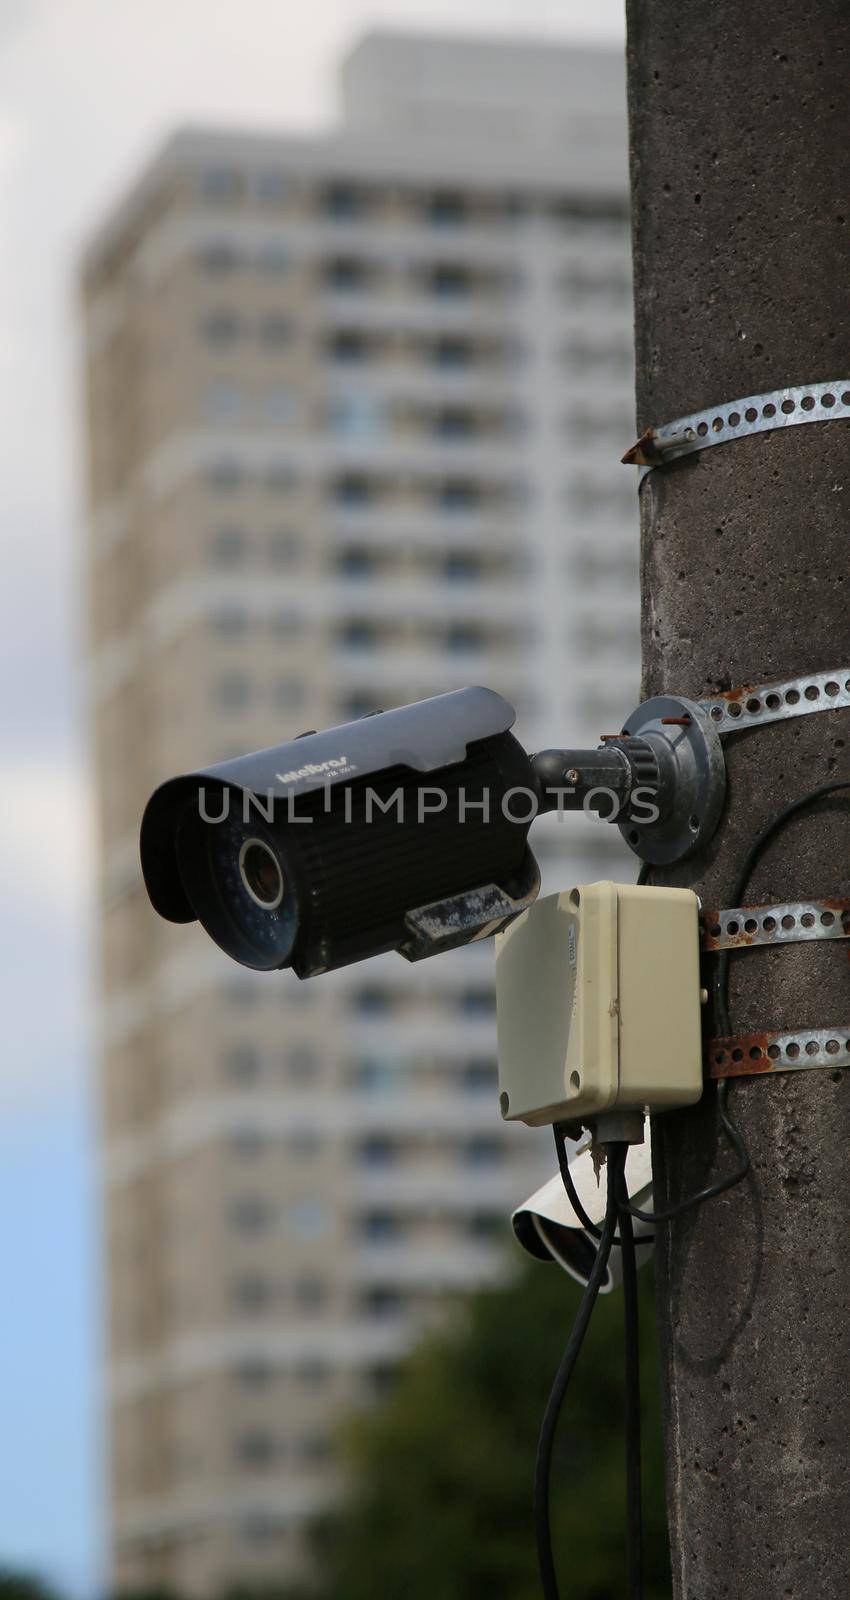 salvador, bahia / brazil - july 2, 2020: monitoring and security camera is seen in a residential condominium in the city of Salvador.